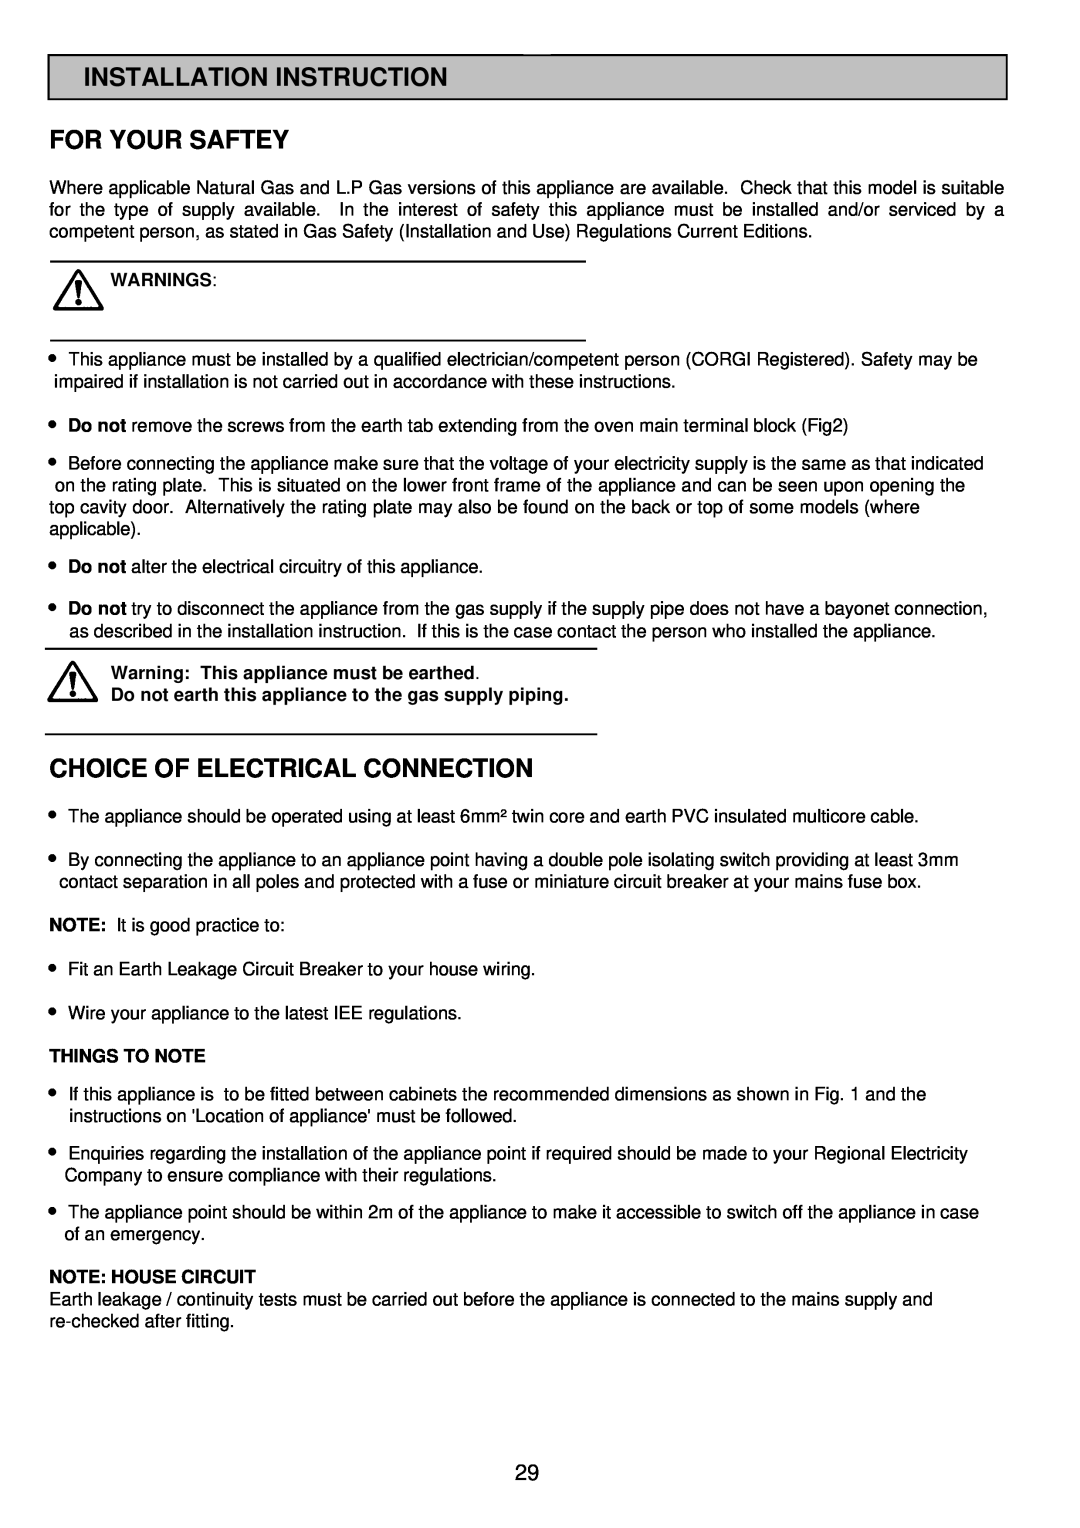 Electrolux SIM 533 installation instructions Installation Instruction For Your Saftey, Choice Of Electrical Connection 